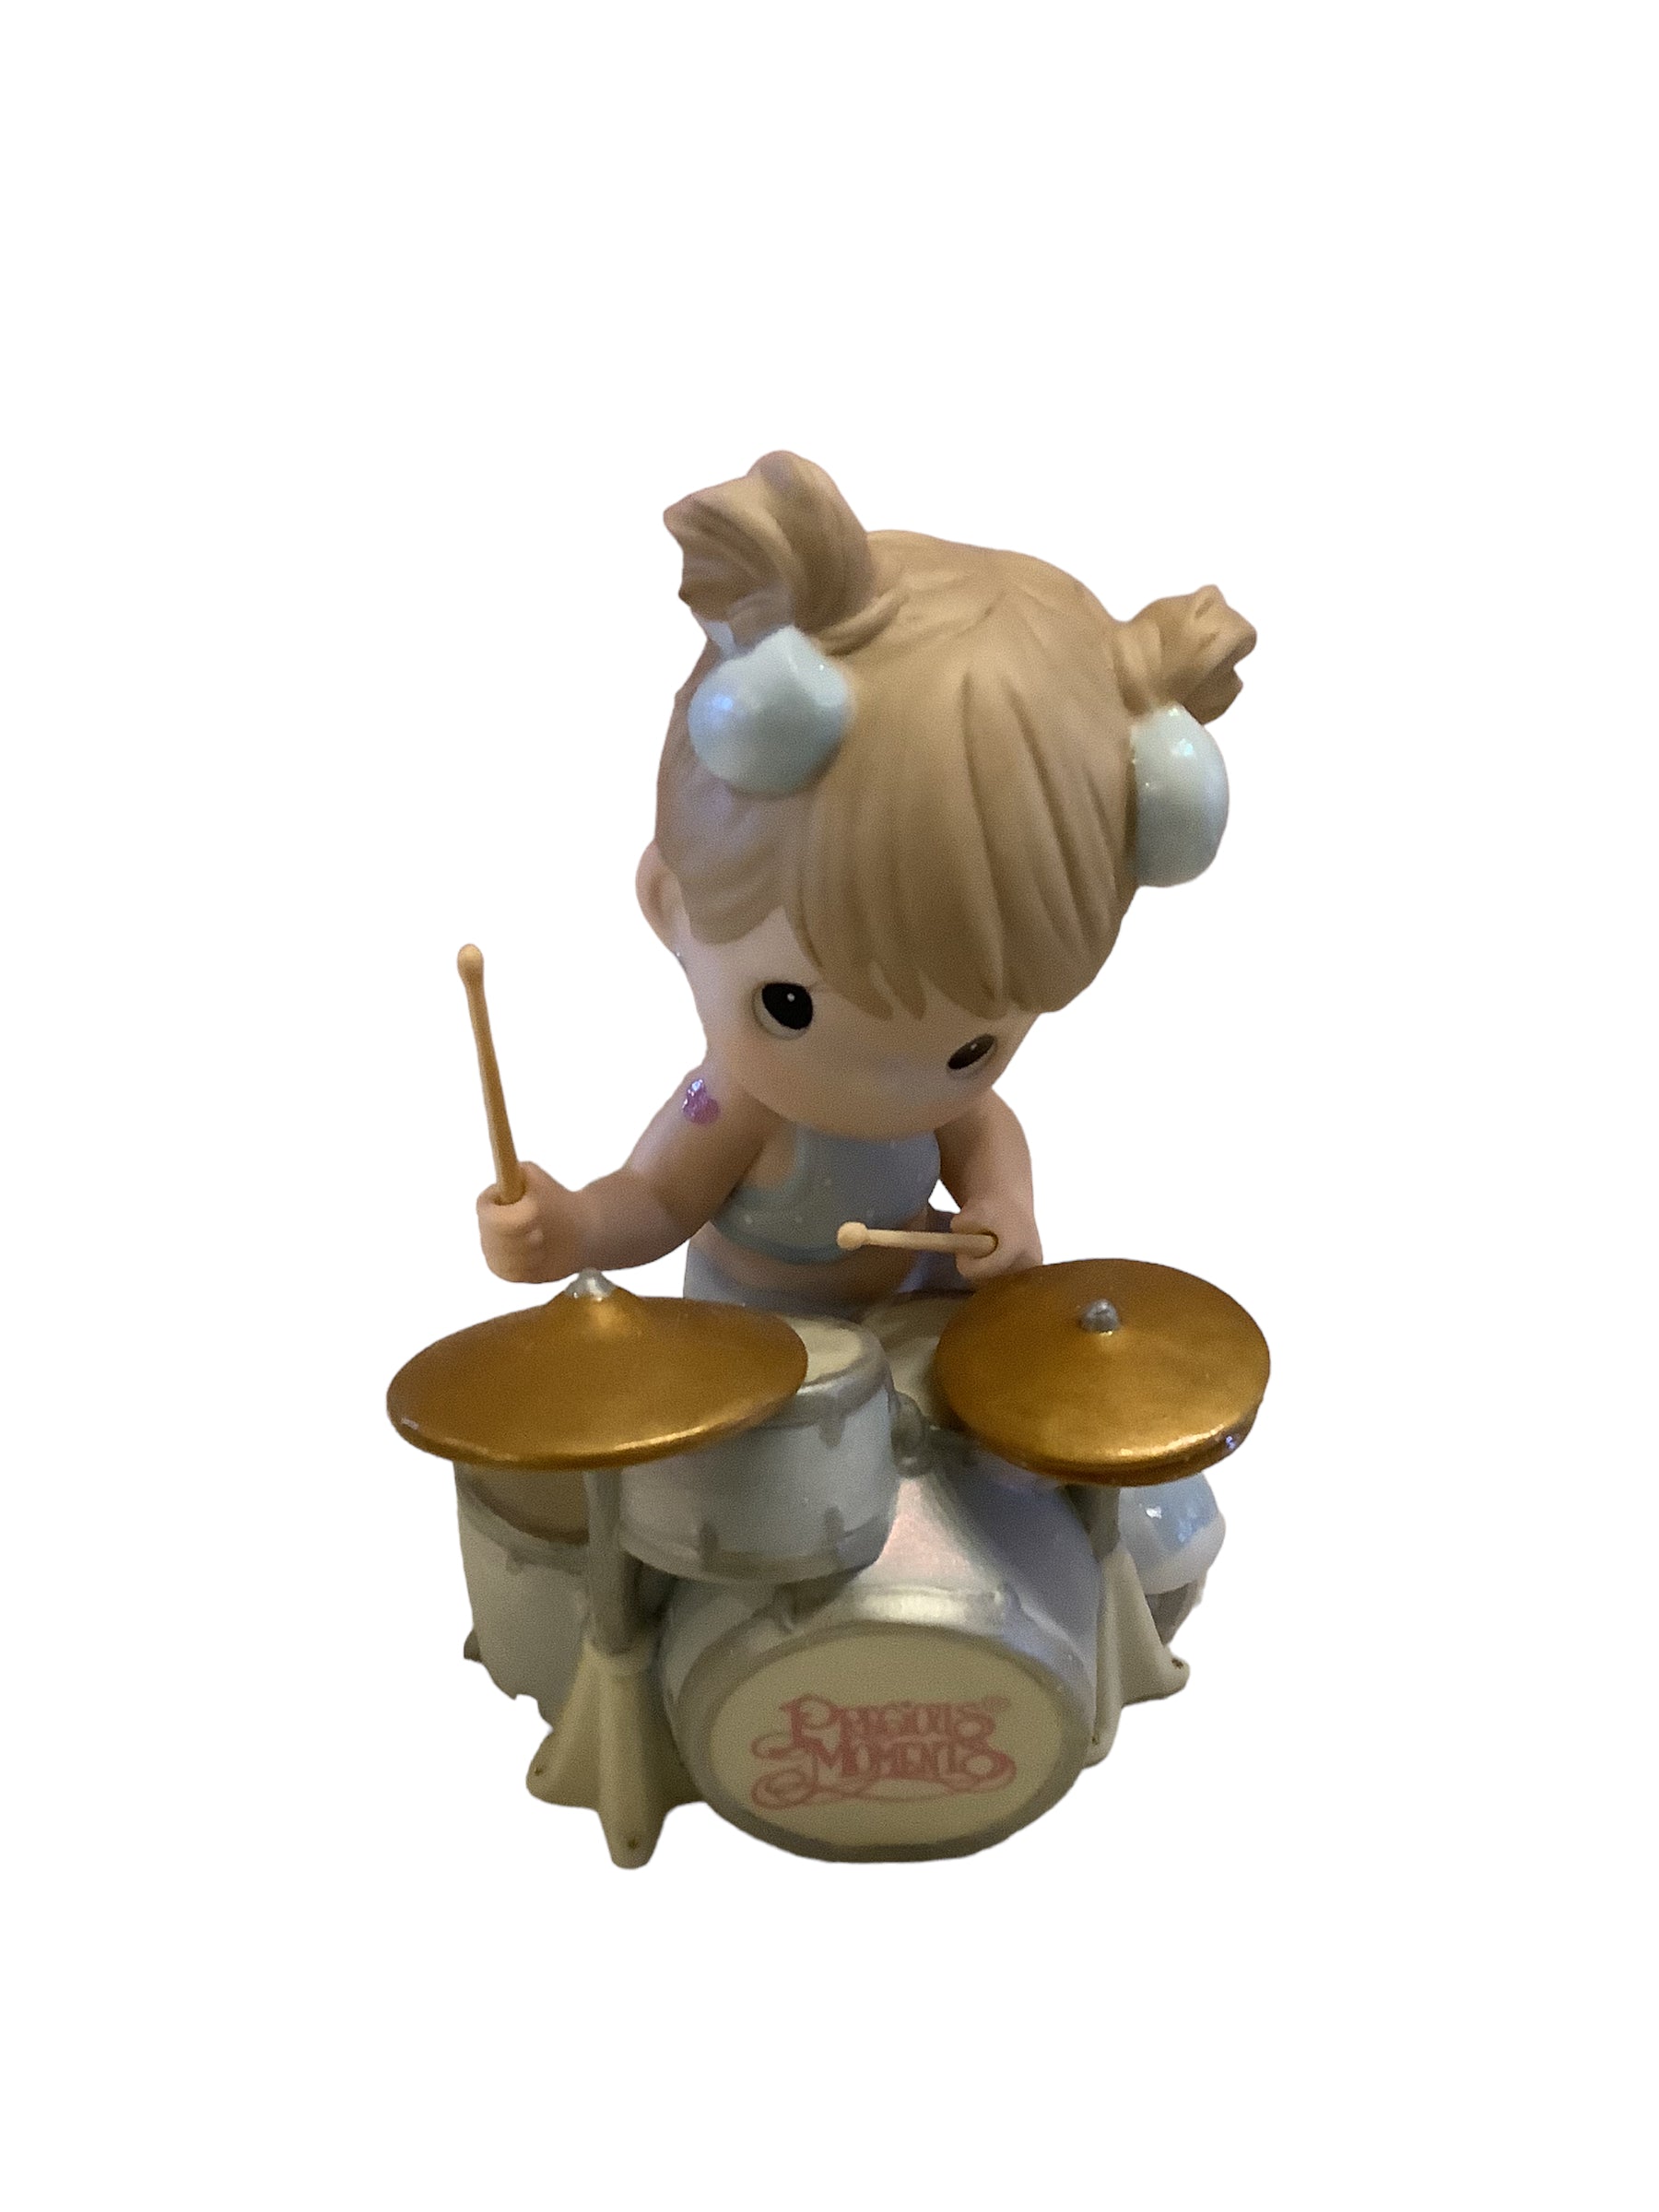 Brought Together Through The Beat - Precious Moment Figurine ...